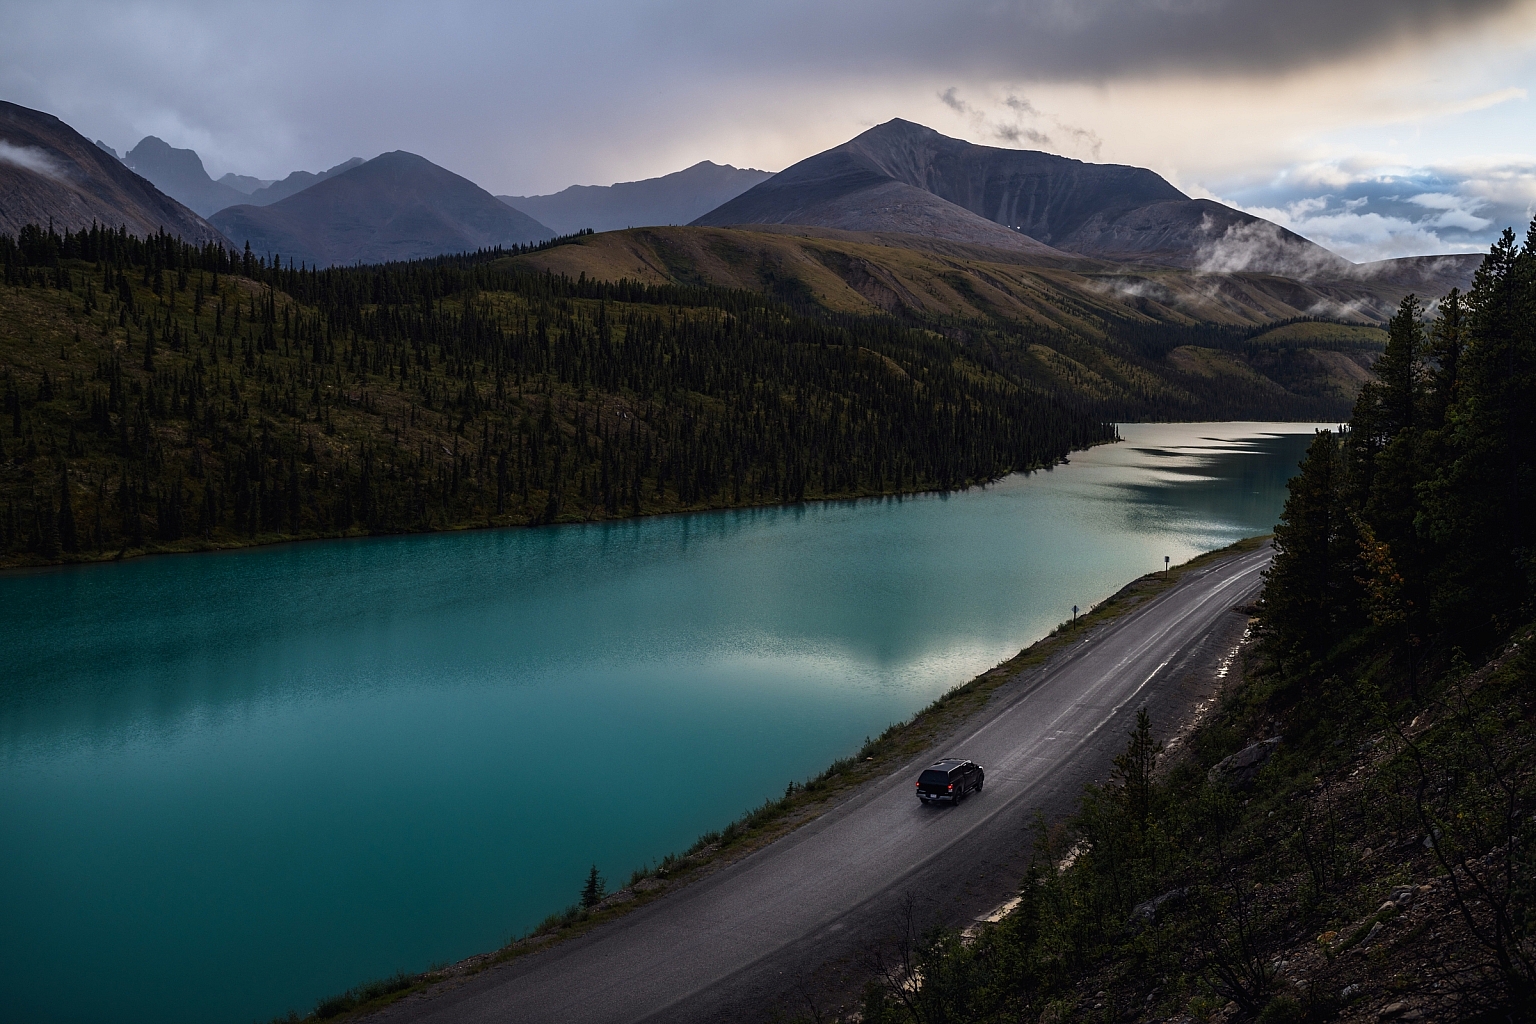 The Alaska Highway winds beside a turquoise lake with mountains in the background.